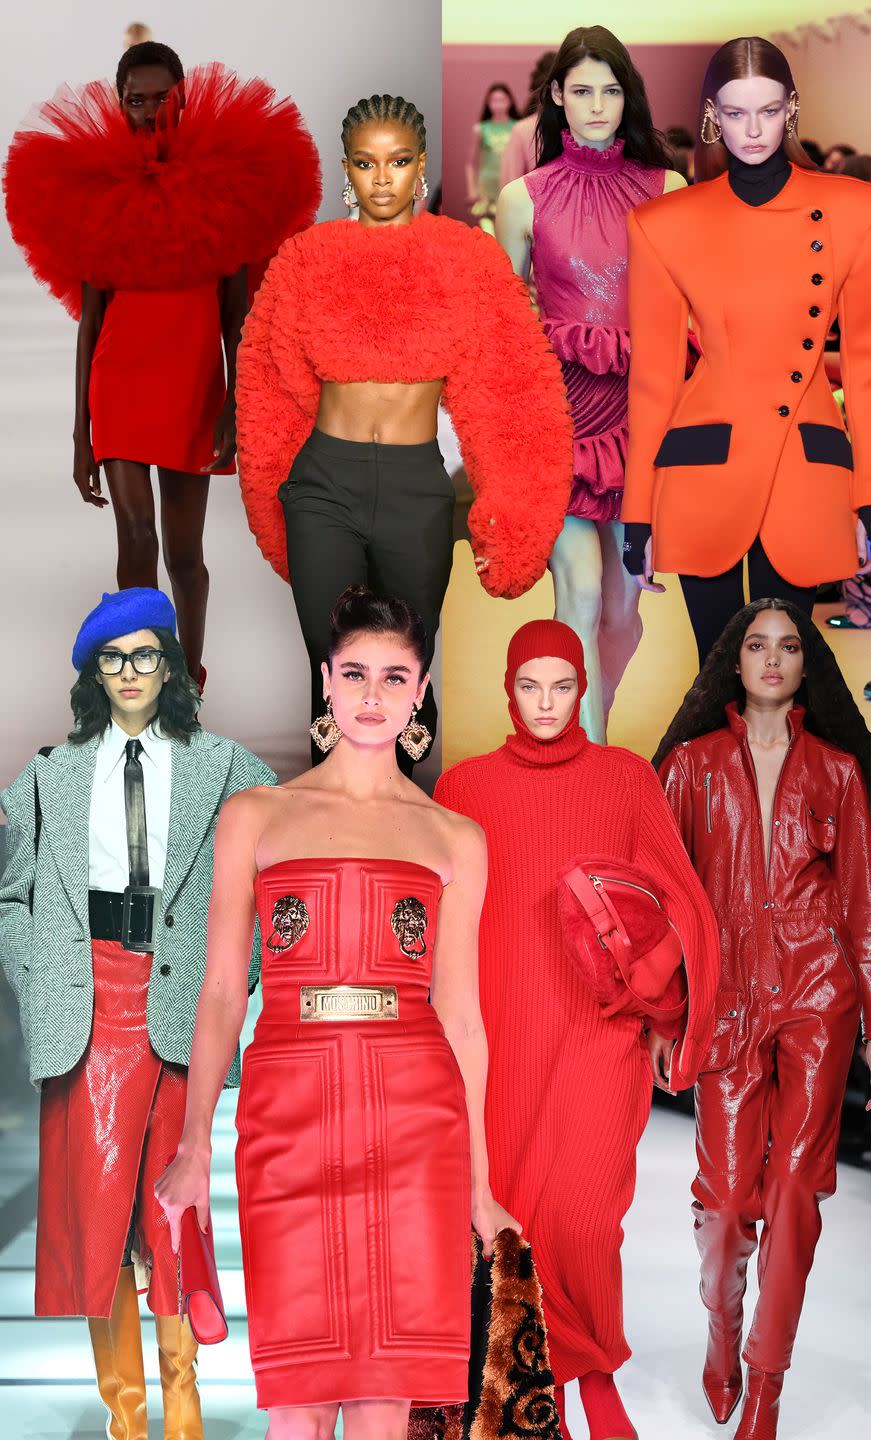 <p>If you’re looking for glamour, look no further. The ’80s are back—and bolder—and redder, than ever. Embrace oversized proportions and epic glitz in looks meant to be immortalized on film. It’s giving old-school Valentino red.<br></p><p>Clockwise from left: Carolina Herrera, LaQuan Smith, Paco Rabanne, Dolce & Gabbana, Gucci, Moschino, Max Mara, Missoni<br></p>